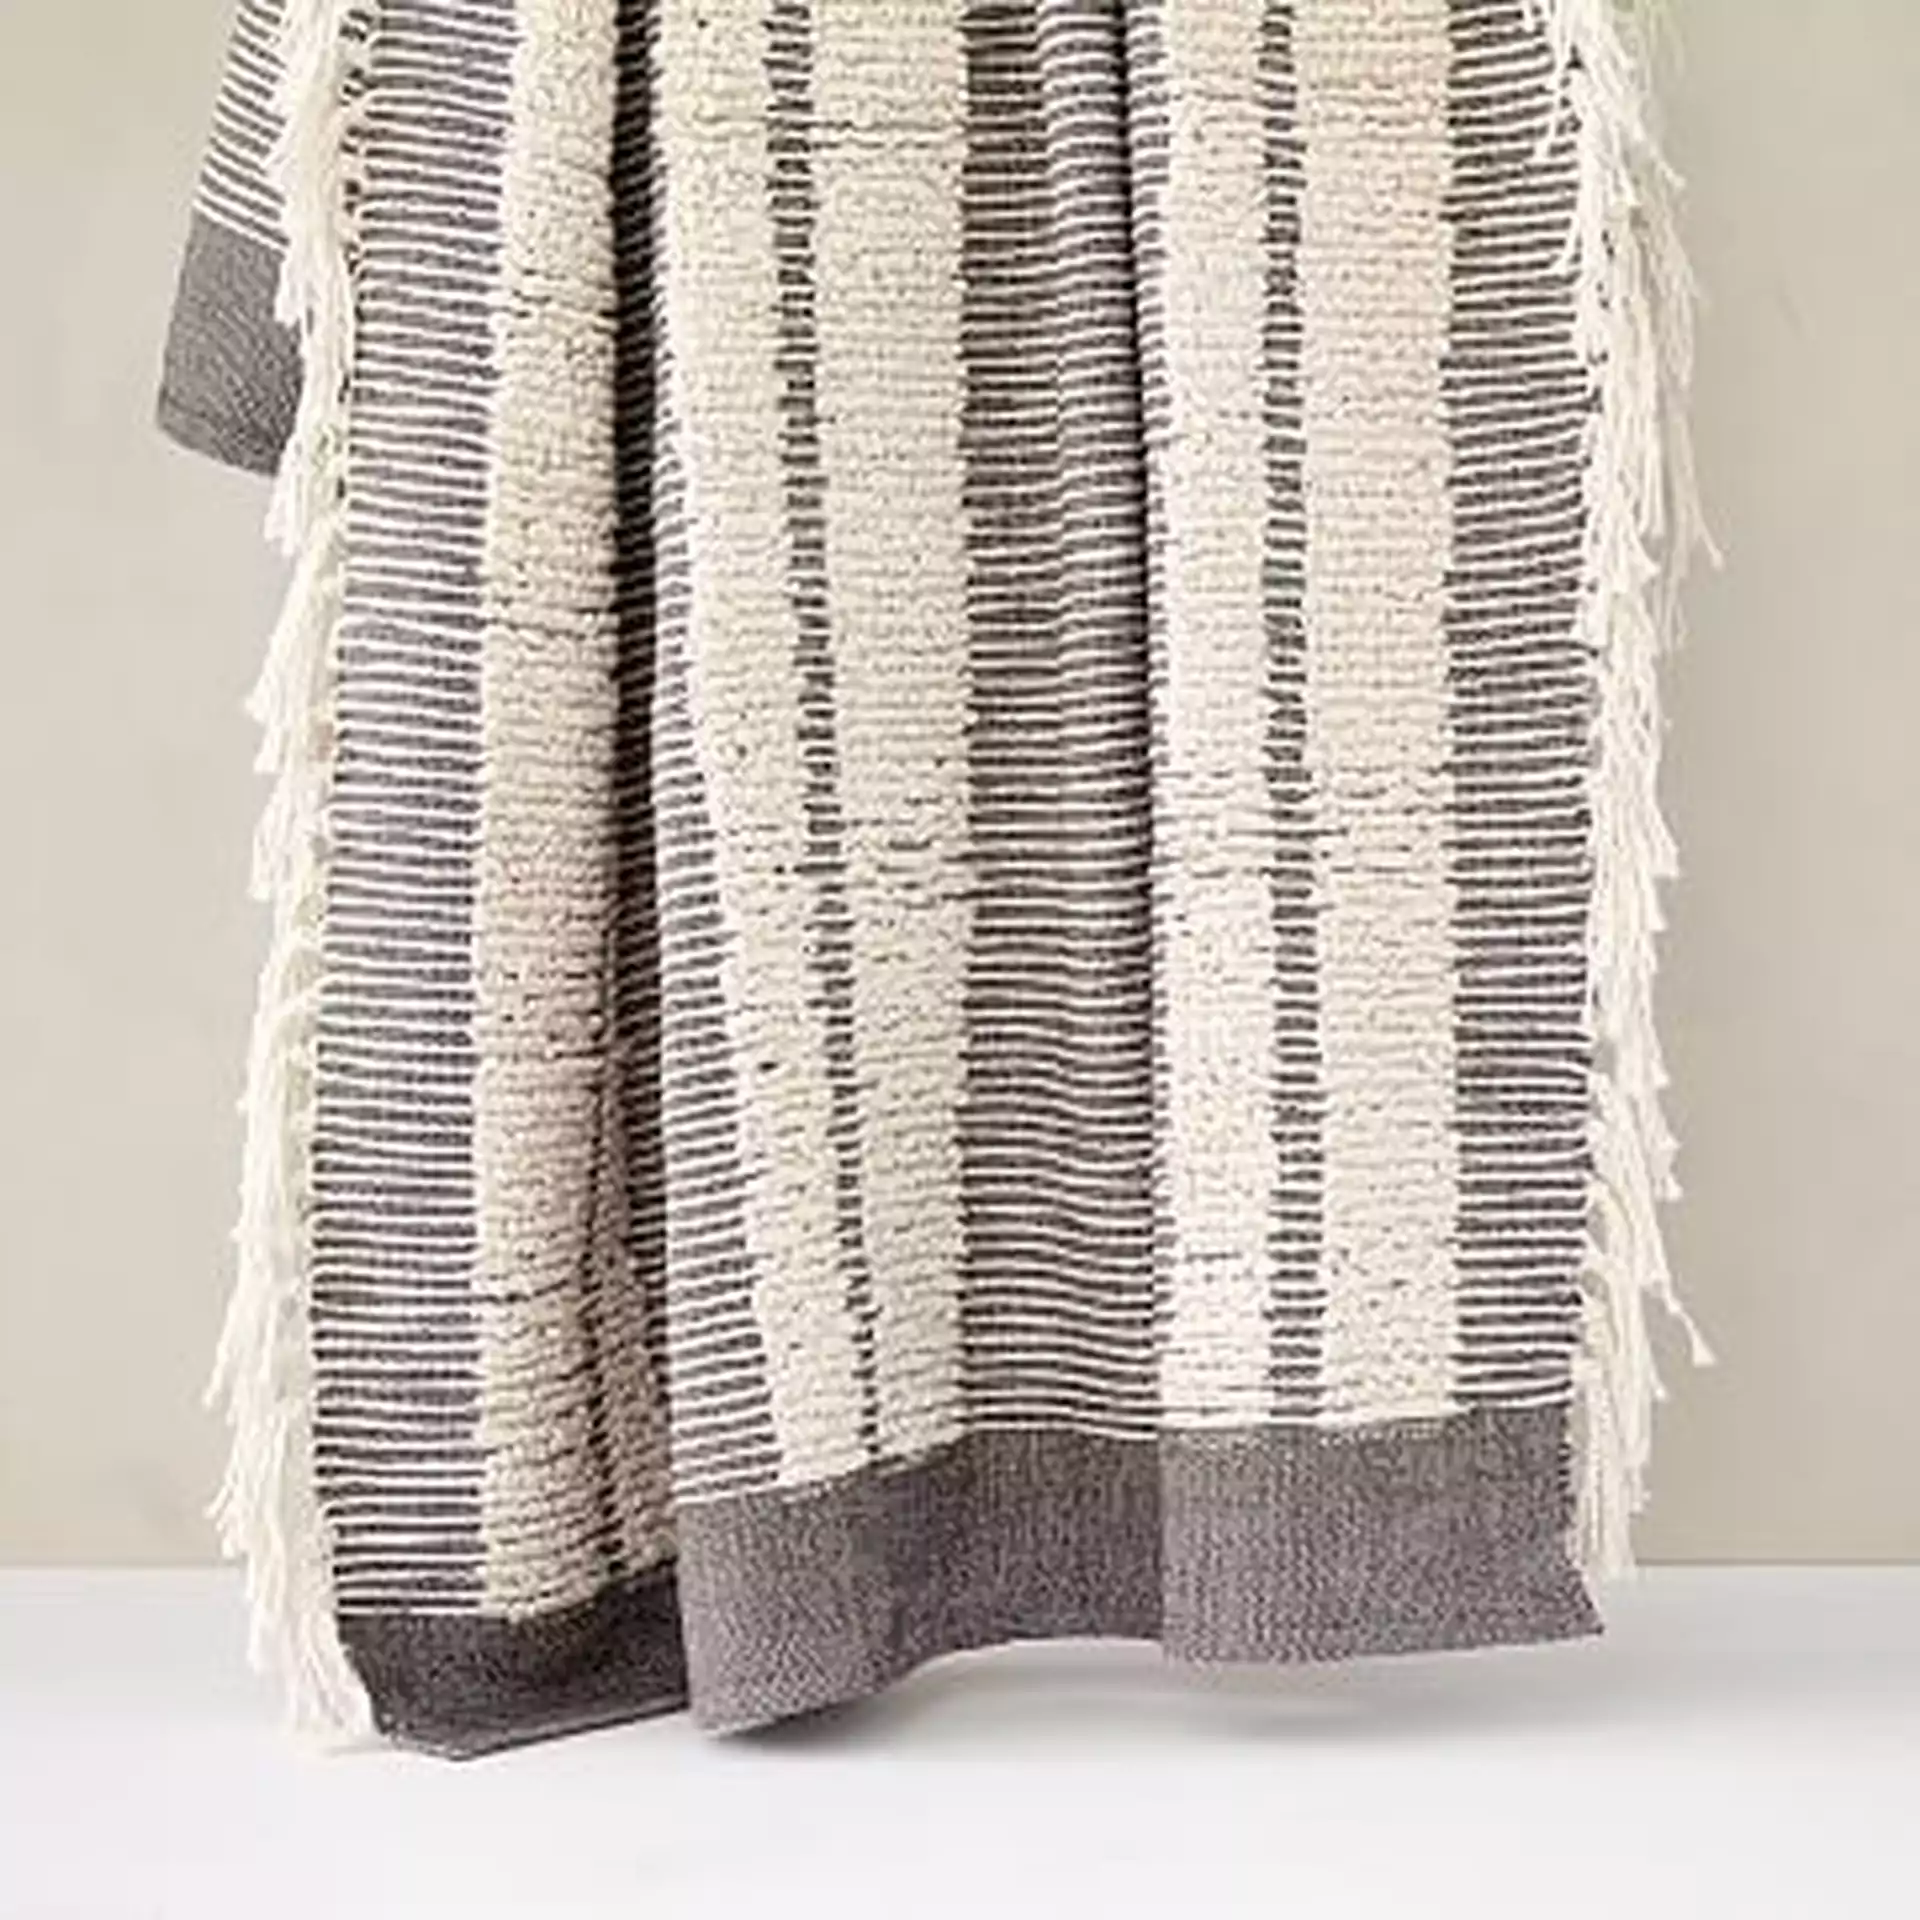 Tufted Lines Throw, 50"x60", Pewter